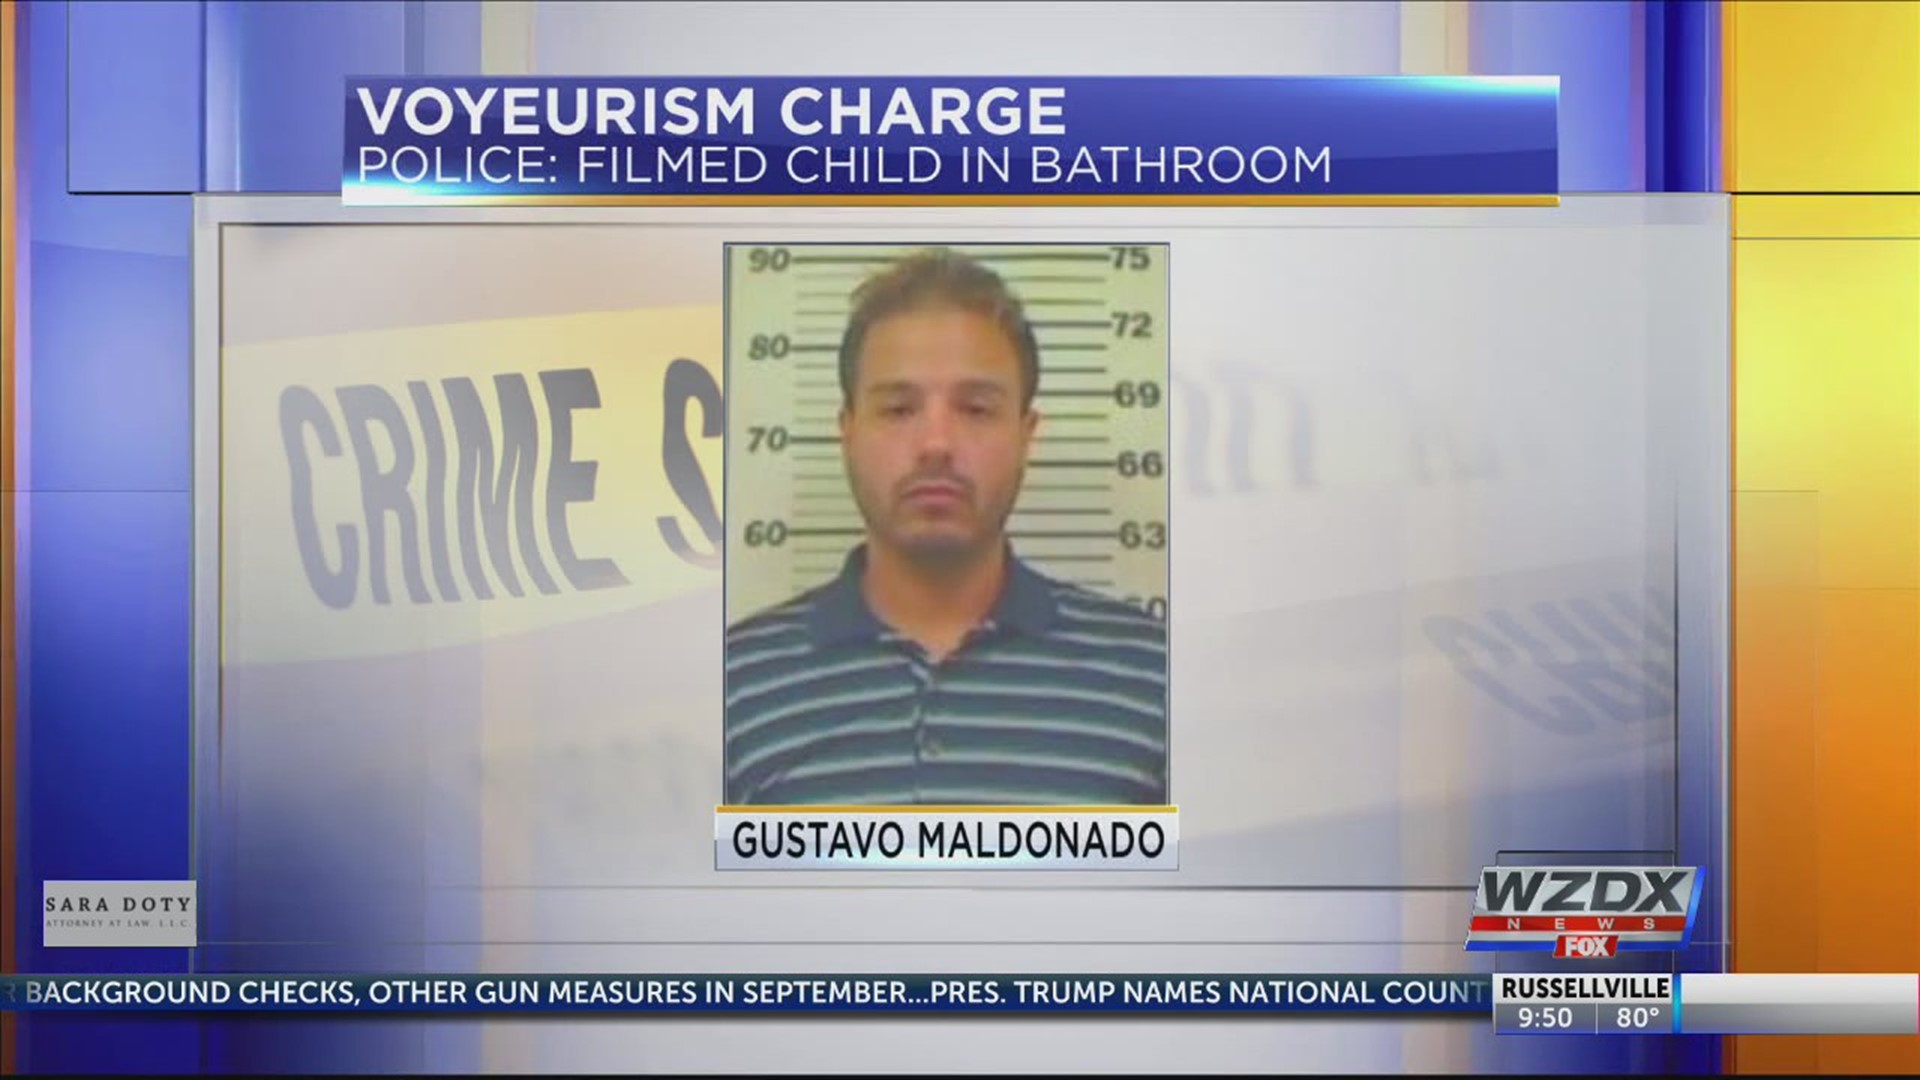 An Alabama man is arrested in Florida for allegedly filming a child in the bathroom at a rest stop.